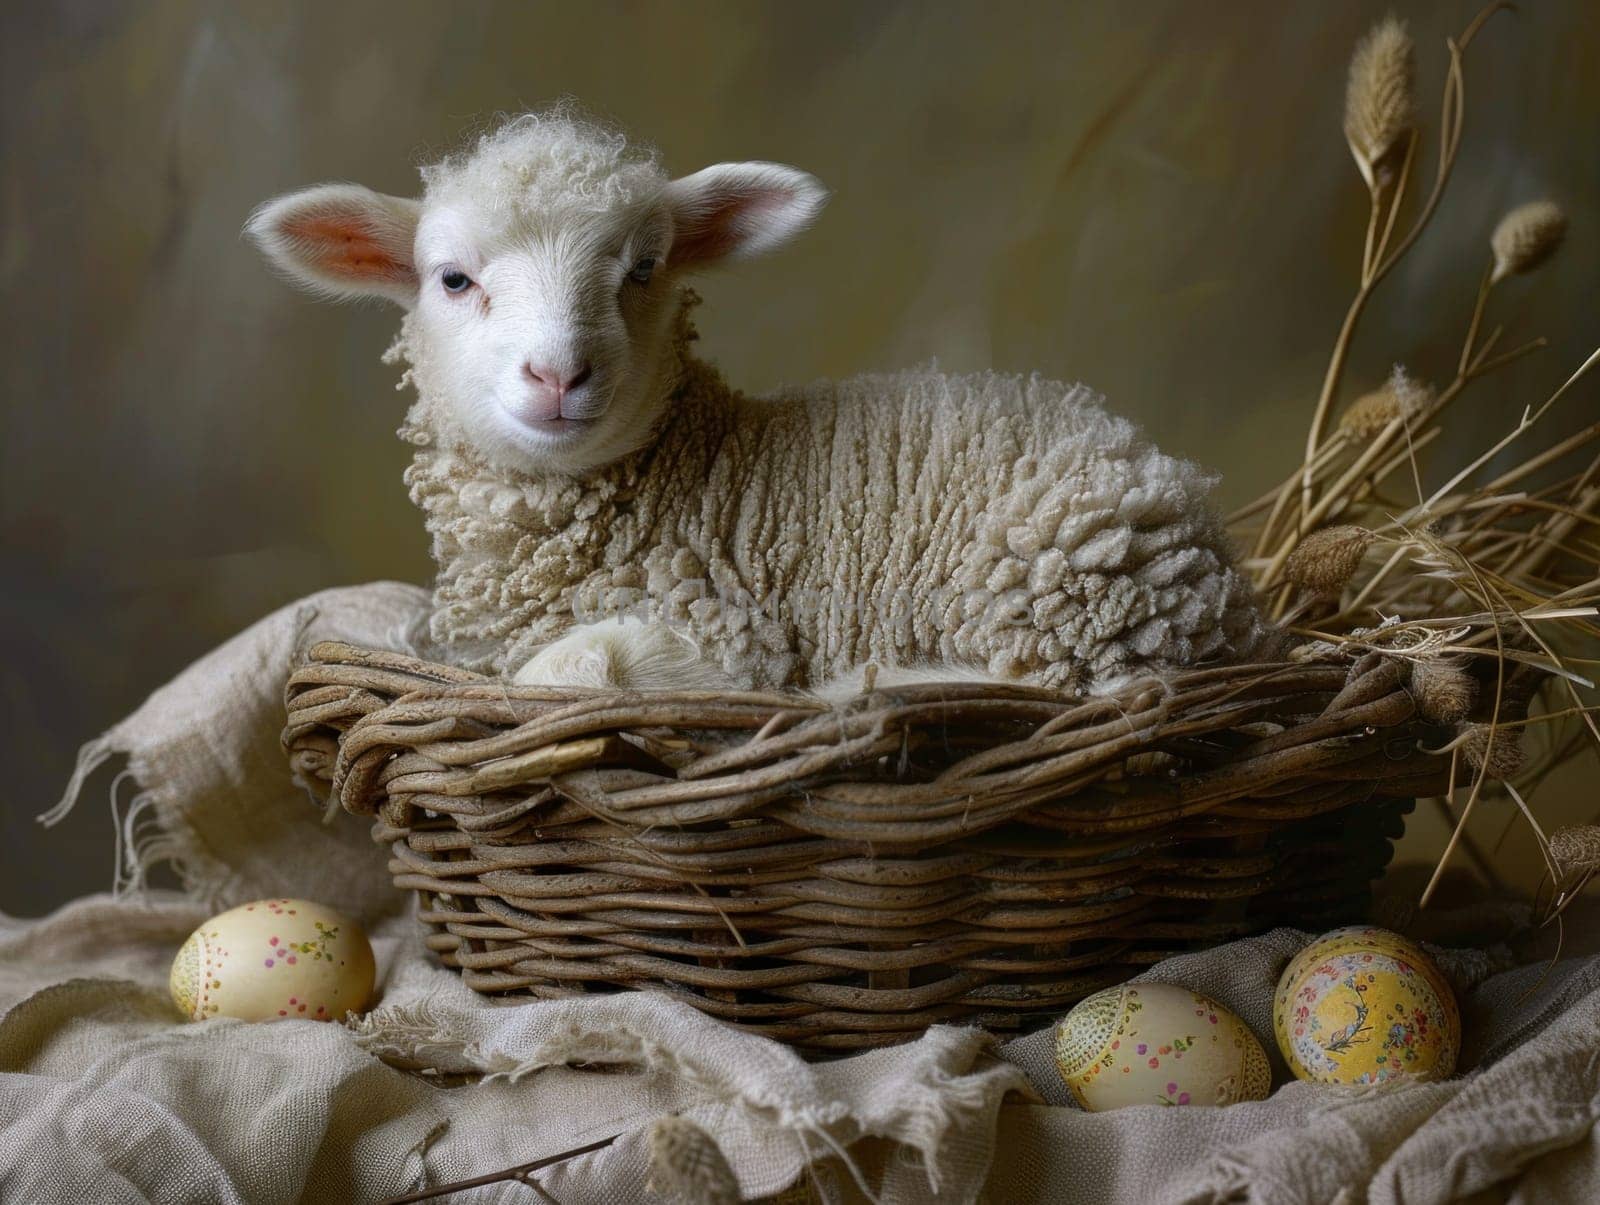 Sheep Sitting in Basket With Eggs by but_photo